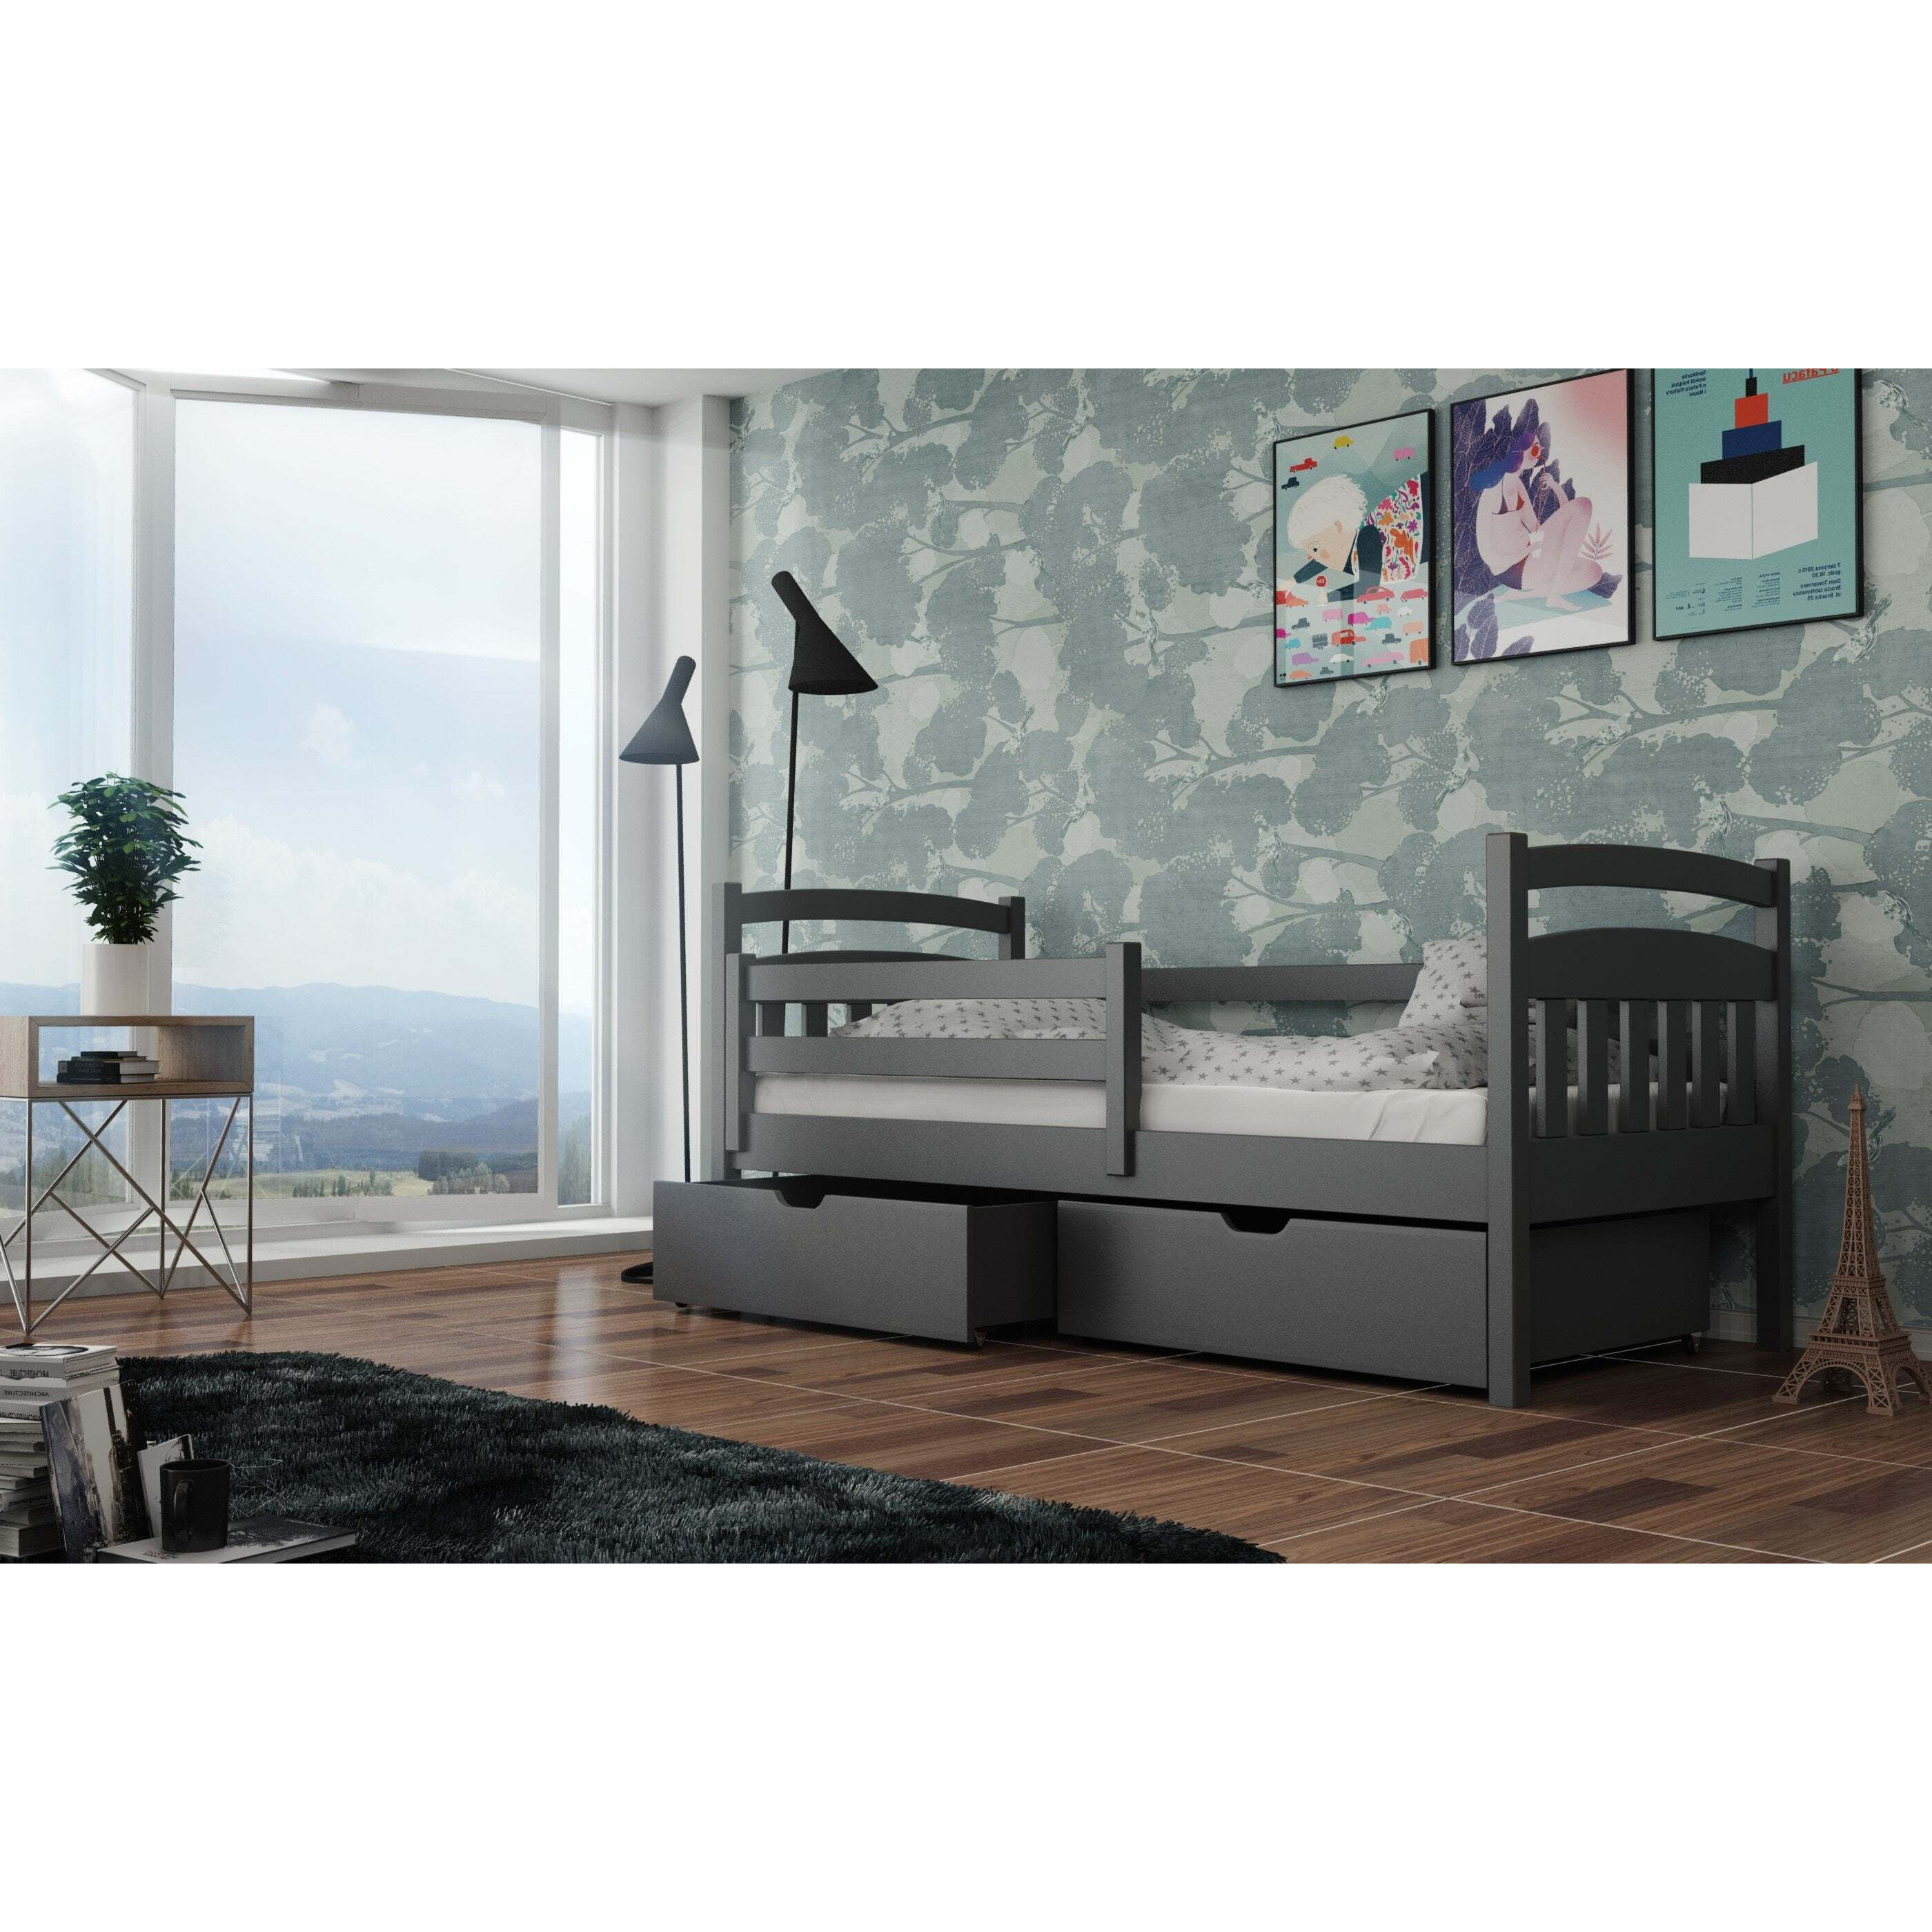 Wooden Single Bed Solo with Storage - Graphite Foam Mattresses - image 1